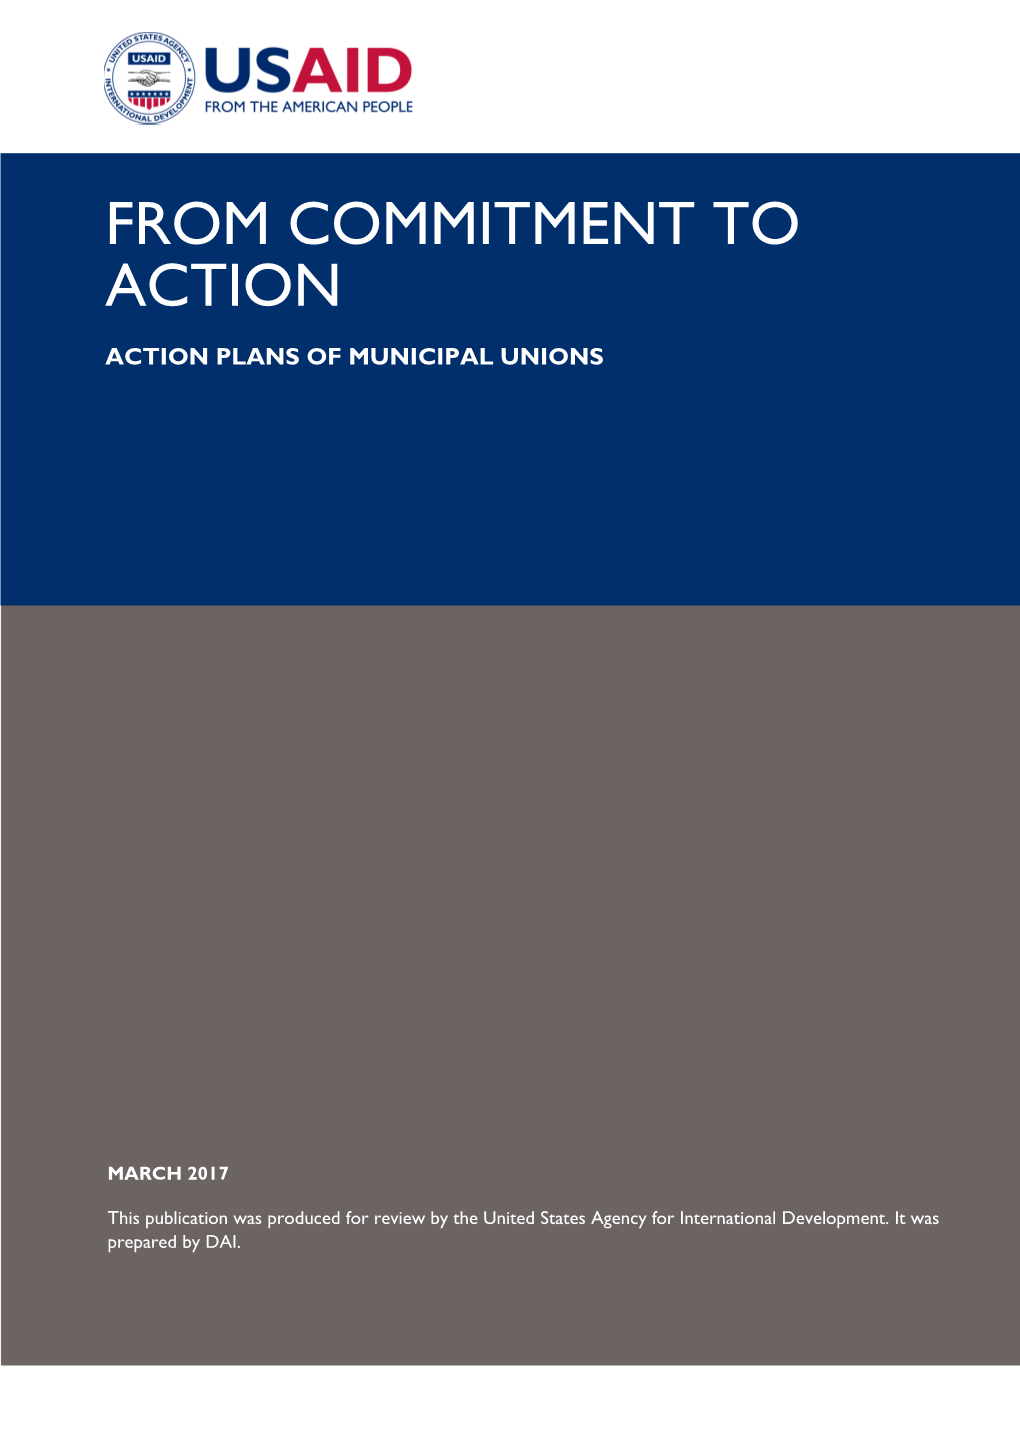 From Commitment to Action